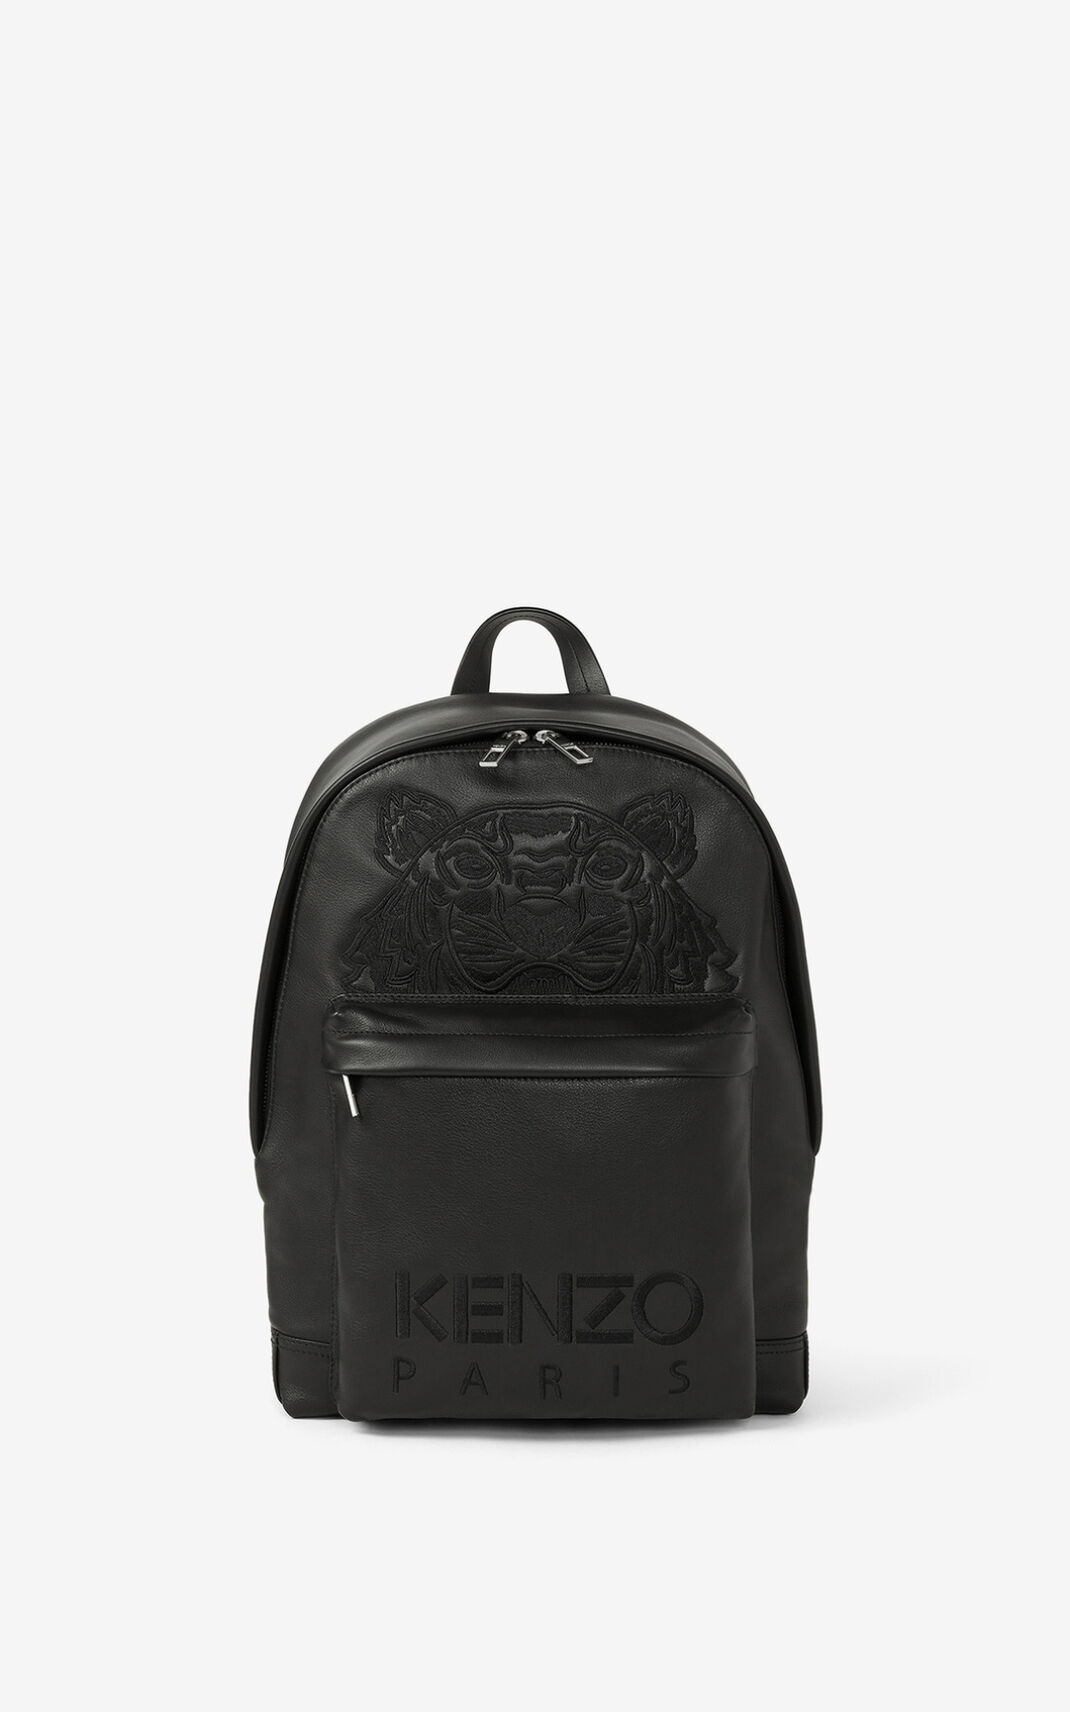 Kenzo Tiger leather Backpack Black For Womens 9025SGQPH